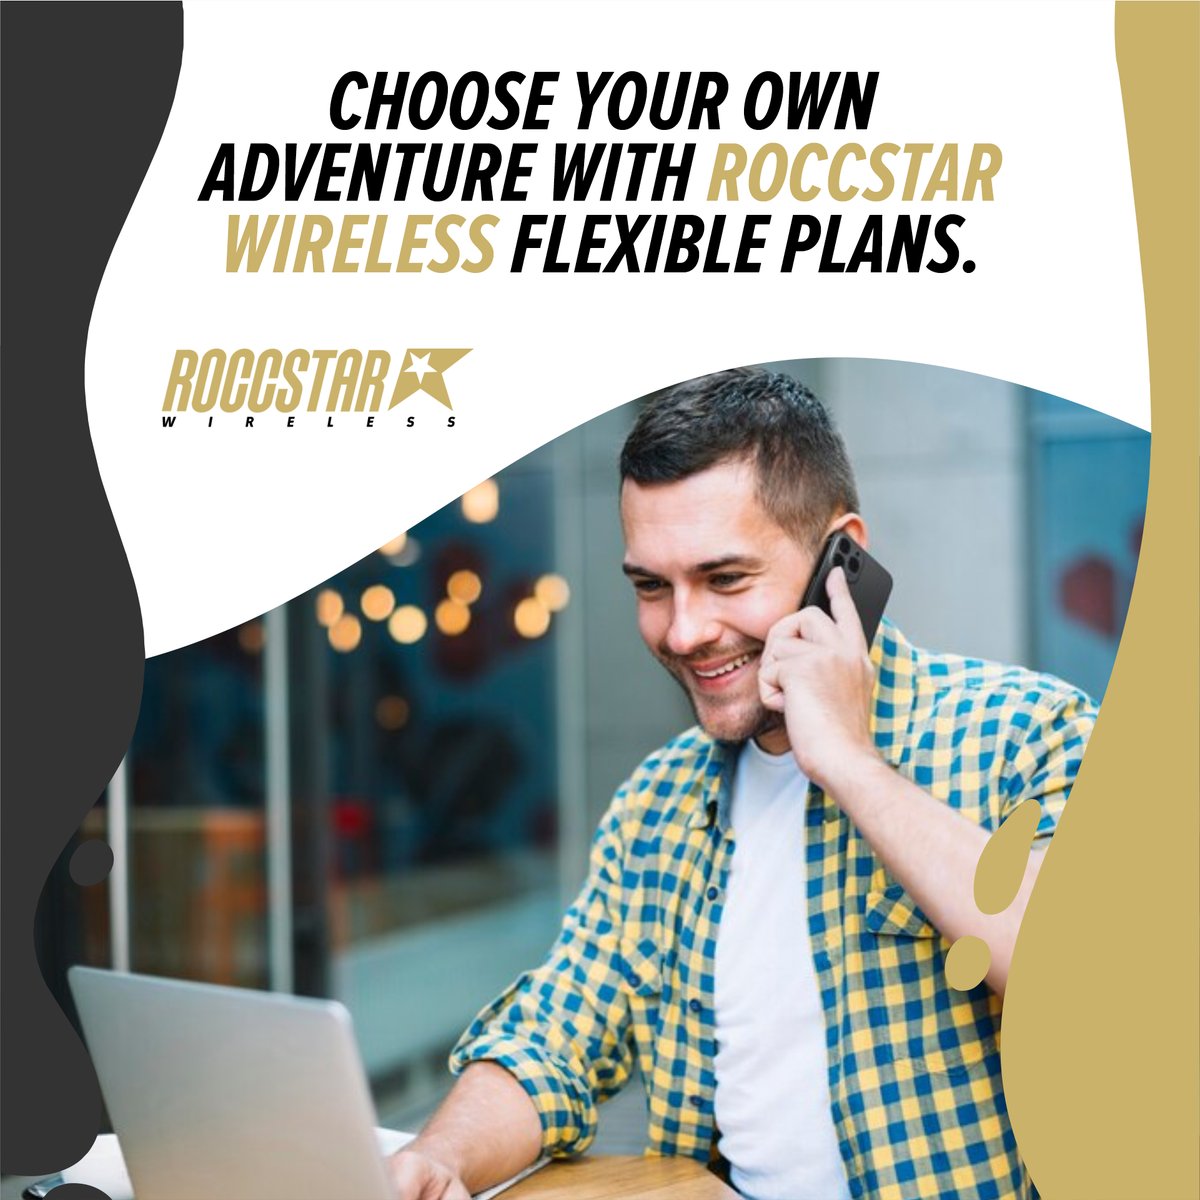 Not everyone rocks to the same beat. That's why Roccstar Wireless offers a variety of flexible plans to fit your unique needs and budget. ✨
--
Contact us now: roccstarwireless.com

#roccstarwireless
#flexibleplans
#uniqueneeds
#budgetfriendly
#dataplans
#mobilehotspots